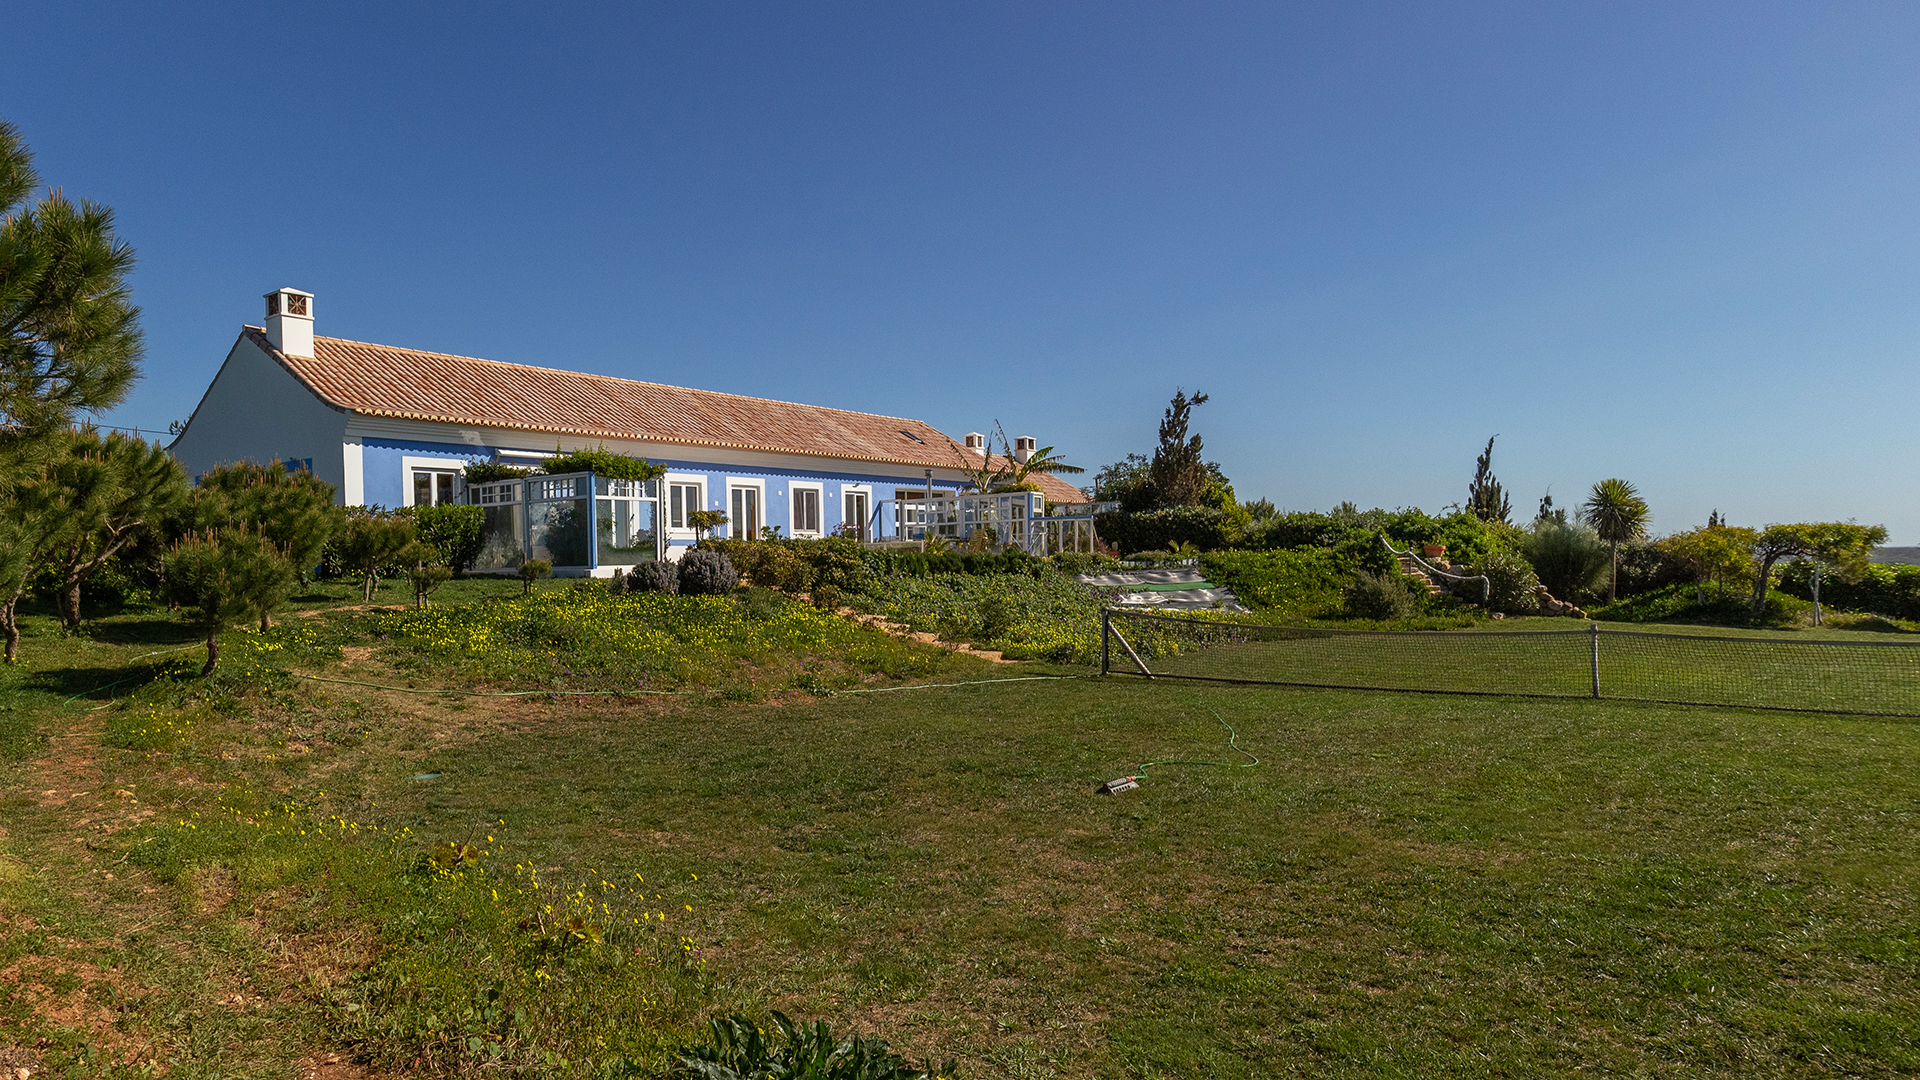 Country estate with 24 hectares of land and sea views, Vila do Bispo, West Algarve | LG1615 Located in the Costa Vicentina Natural Parque this country property is a rare find, with a large plot and stunning sea views. The property consists of a new main house, annexes and outbuildings offering great potential to any nature lover looking for a country property in a much sought-after area.